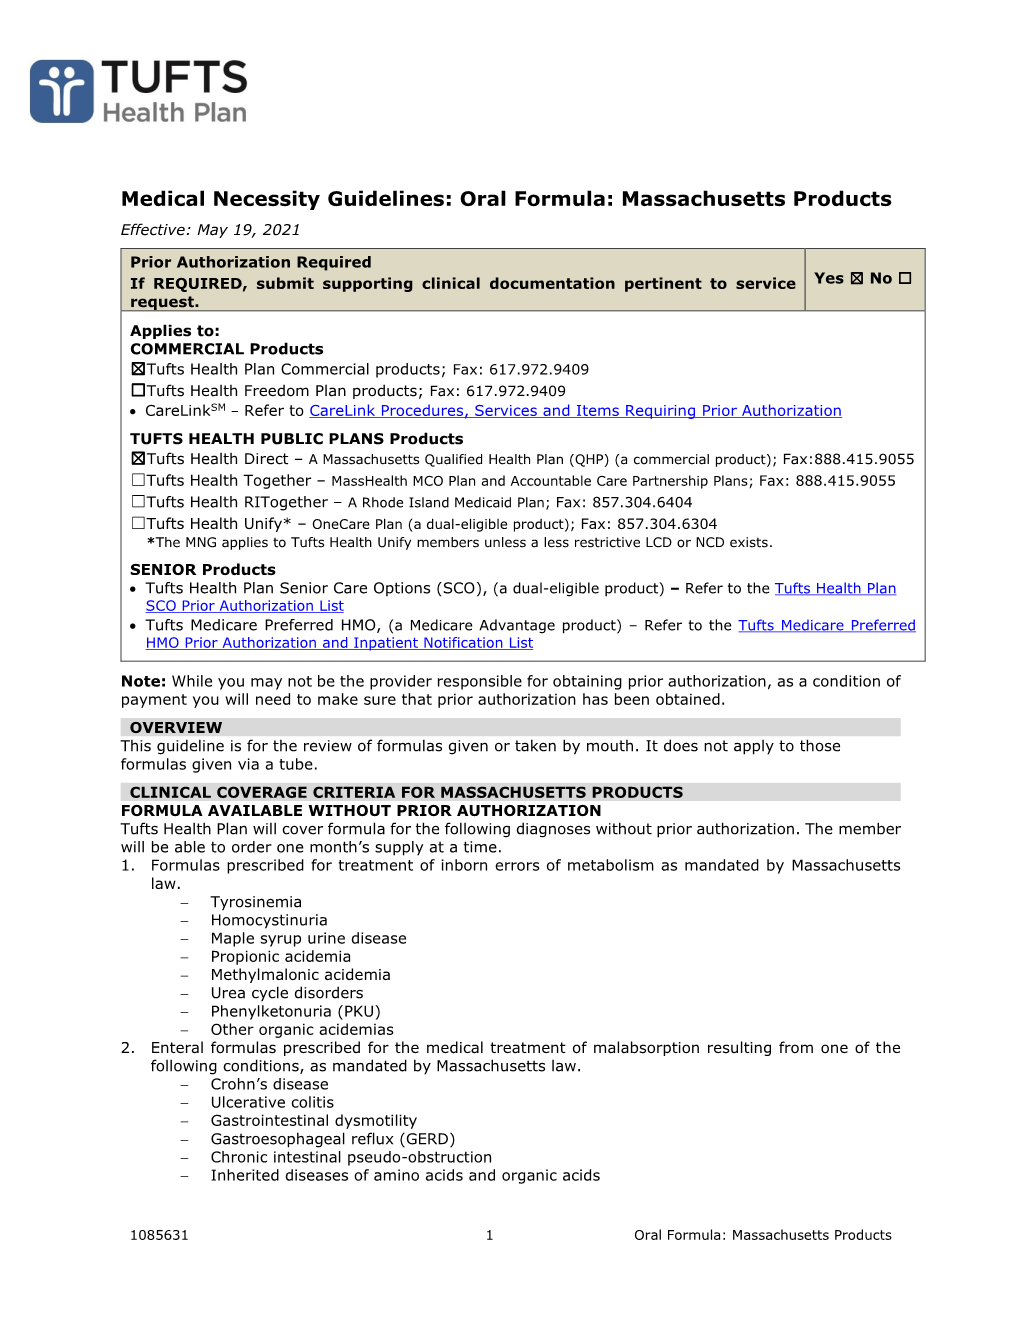 Medical Necessity Guidelines: Oral Formula: Massachusetts Products Effective: May 19, 2021